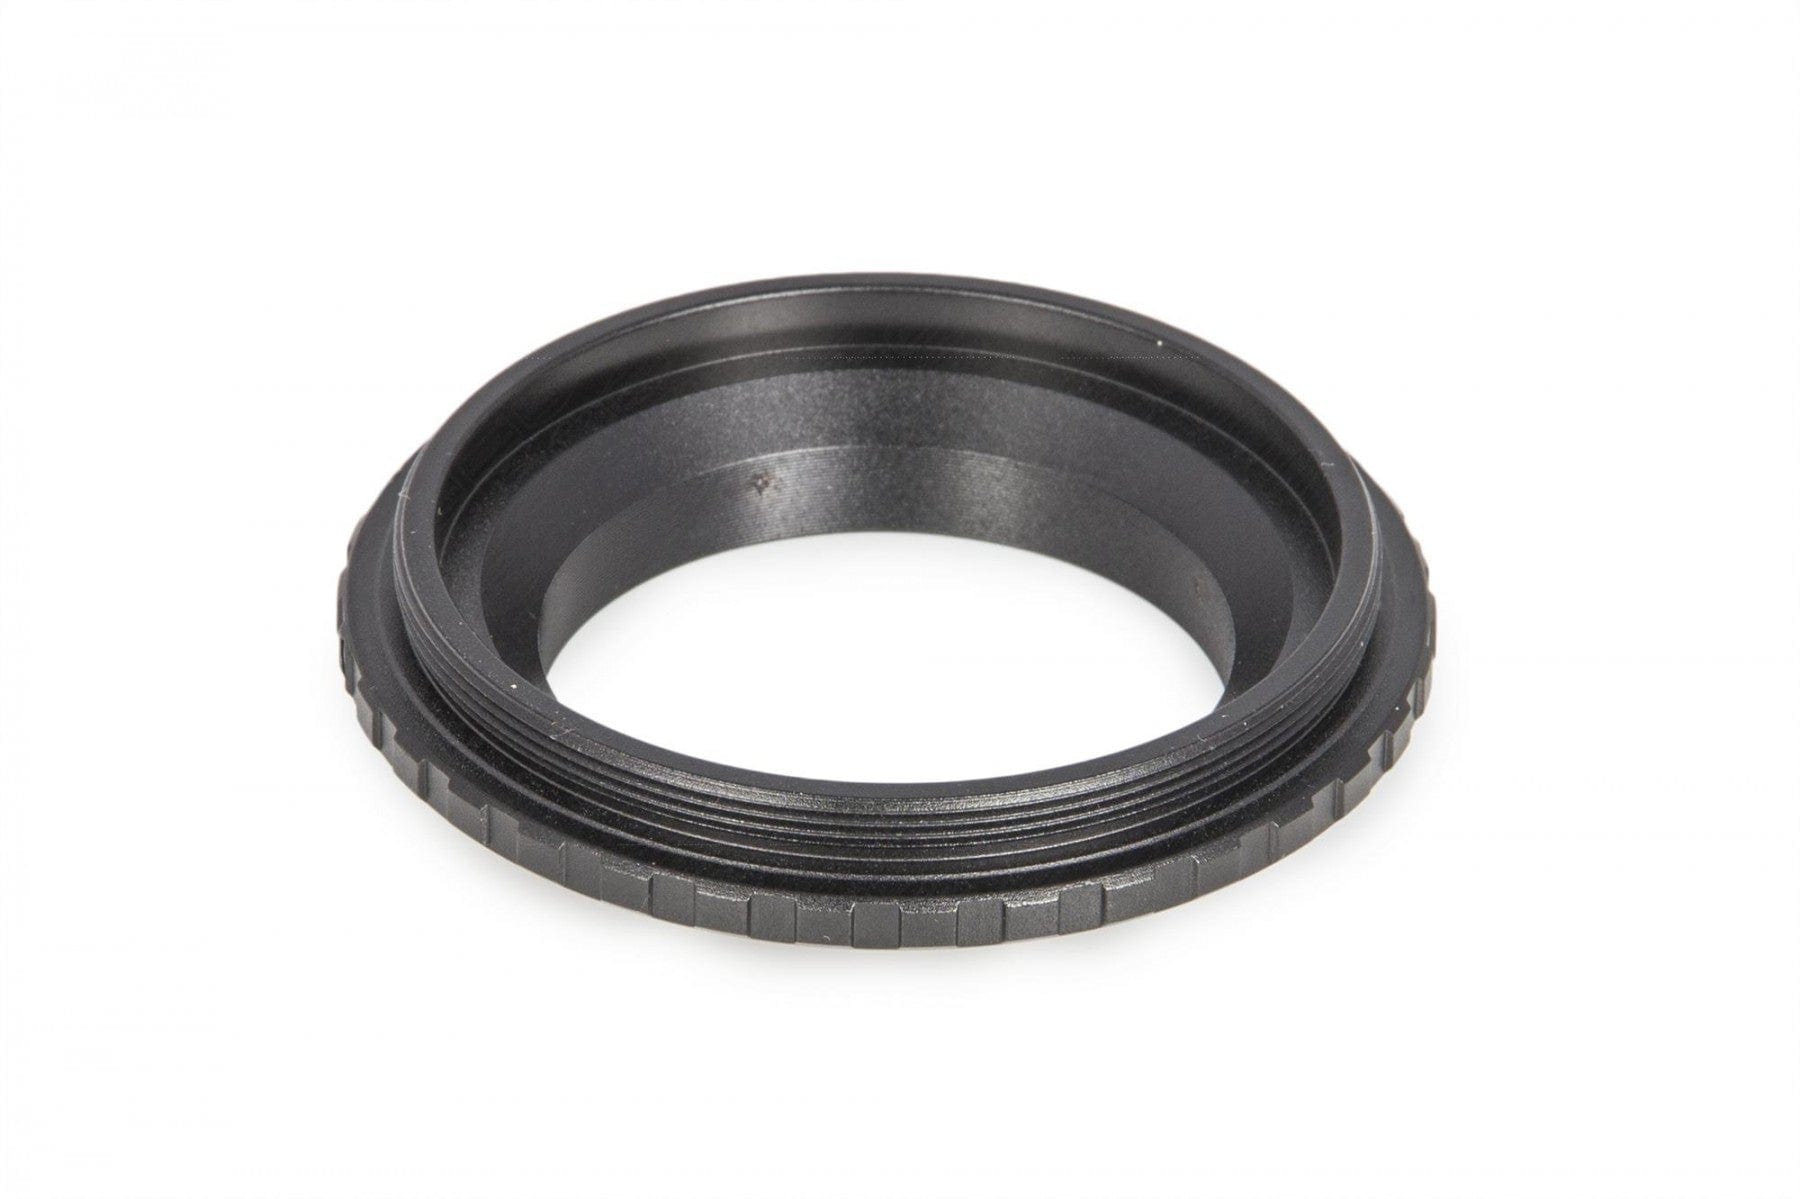 Baader Planetarium Accessory Baader Adapter M68/S52 for Baader Wide-T-Rings - 2458252